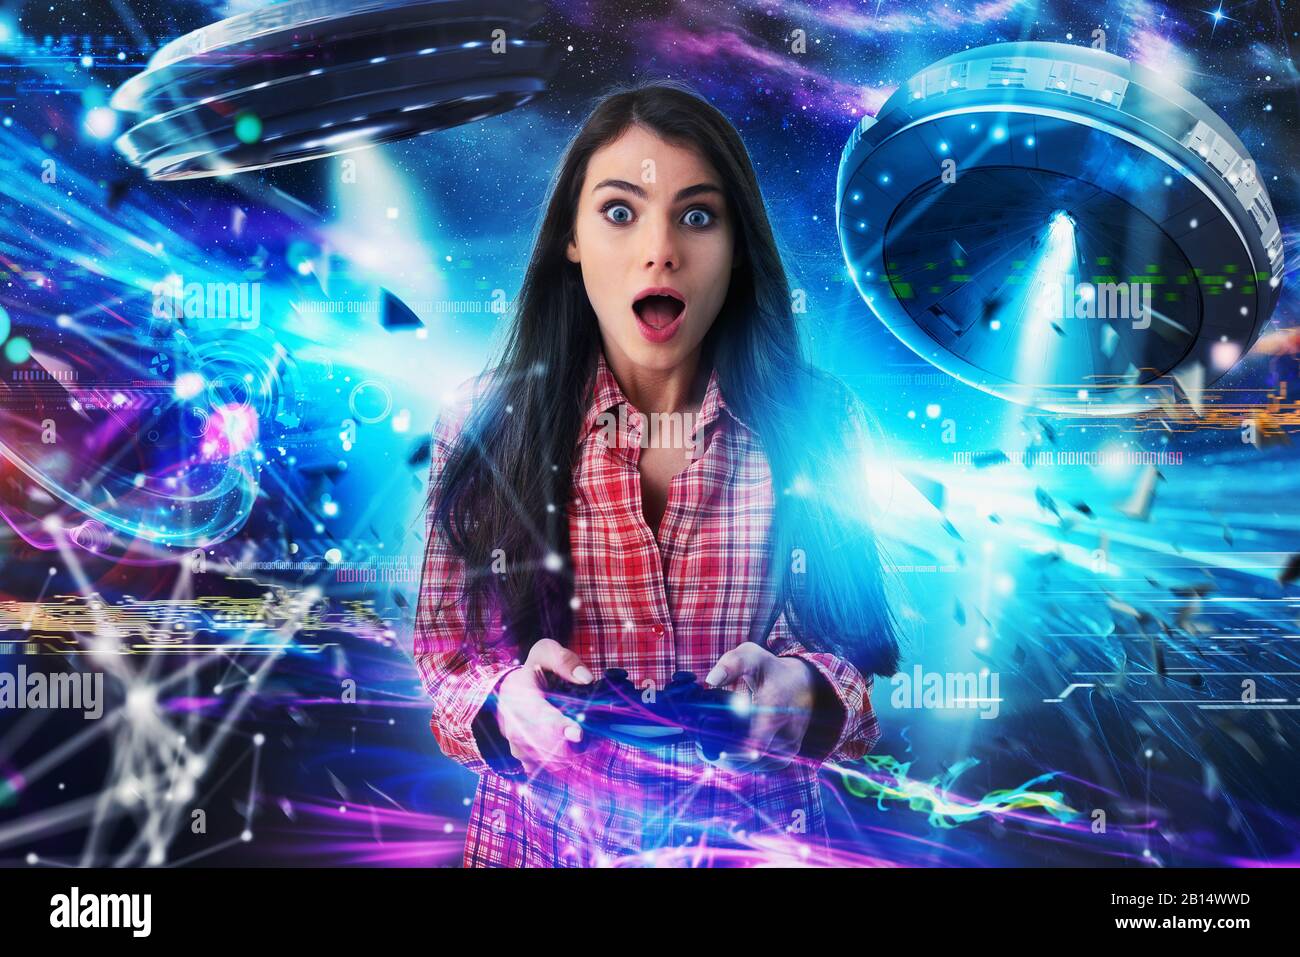 Shocked girl plays with online ufo videogames. Concept of technology and entertainment Stock Photo